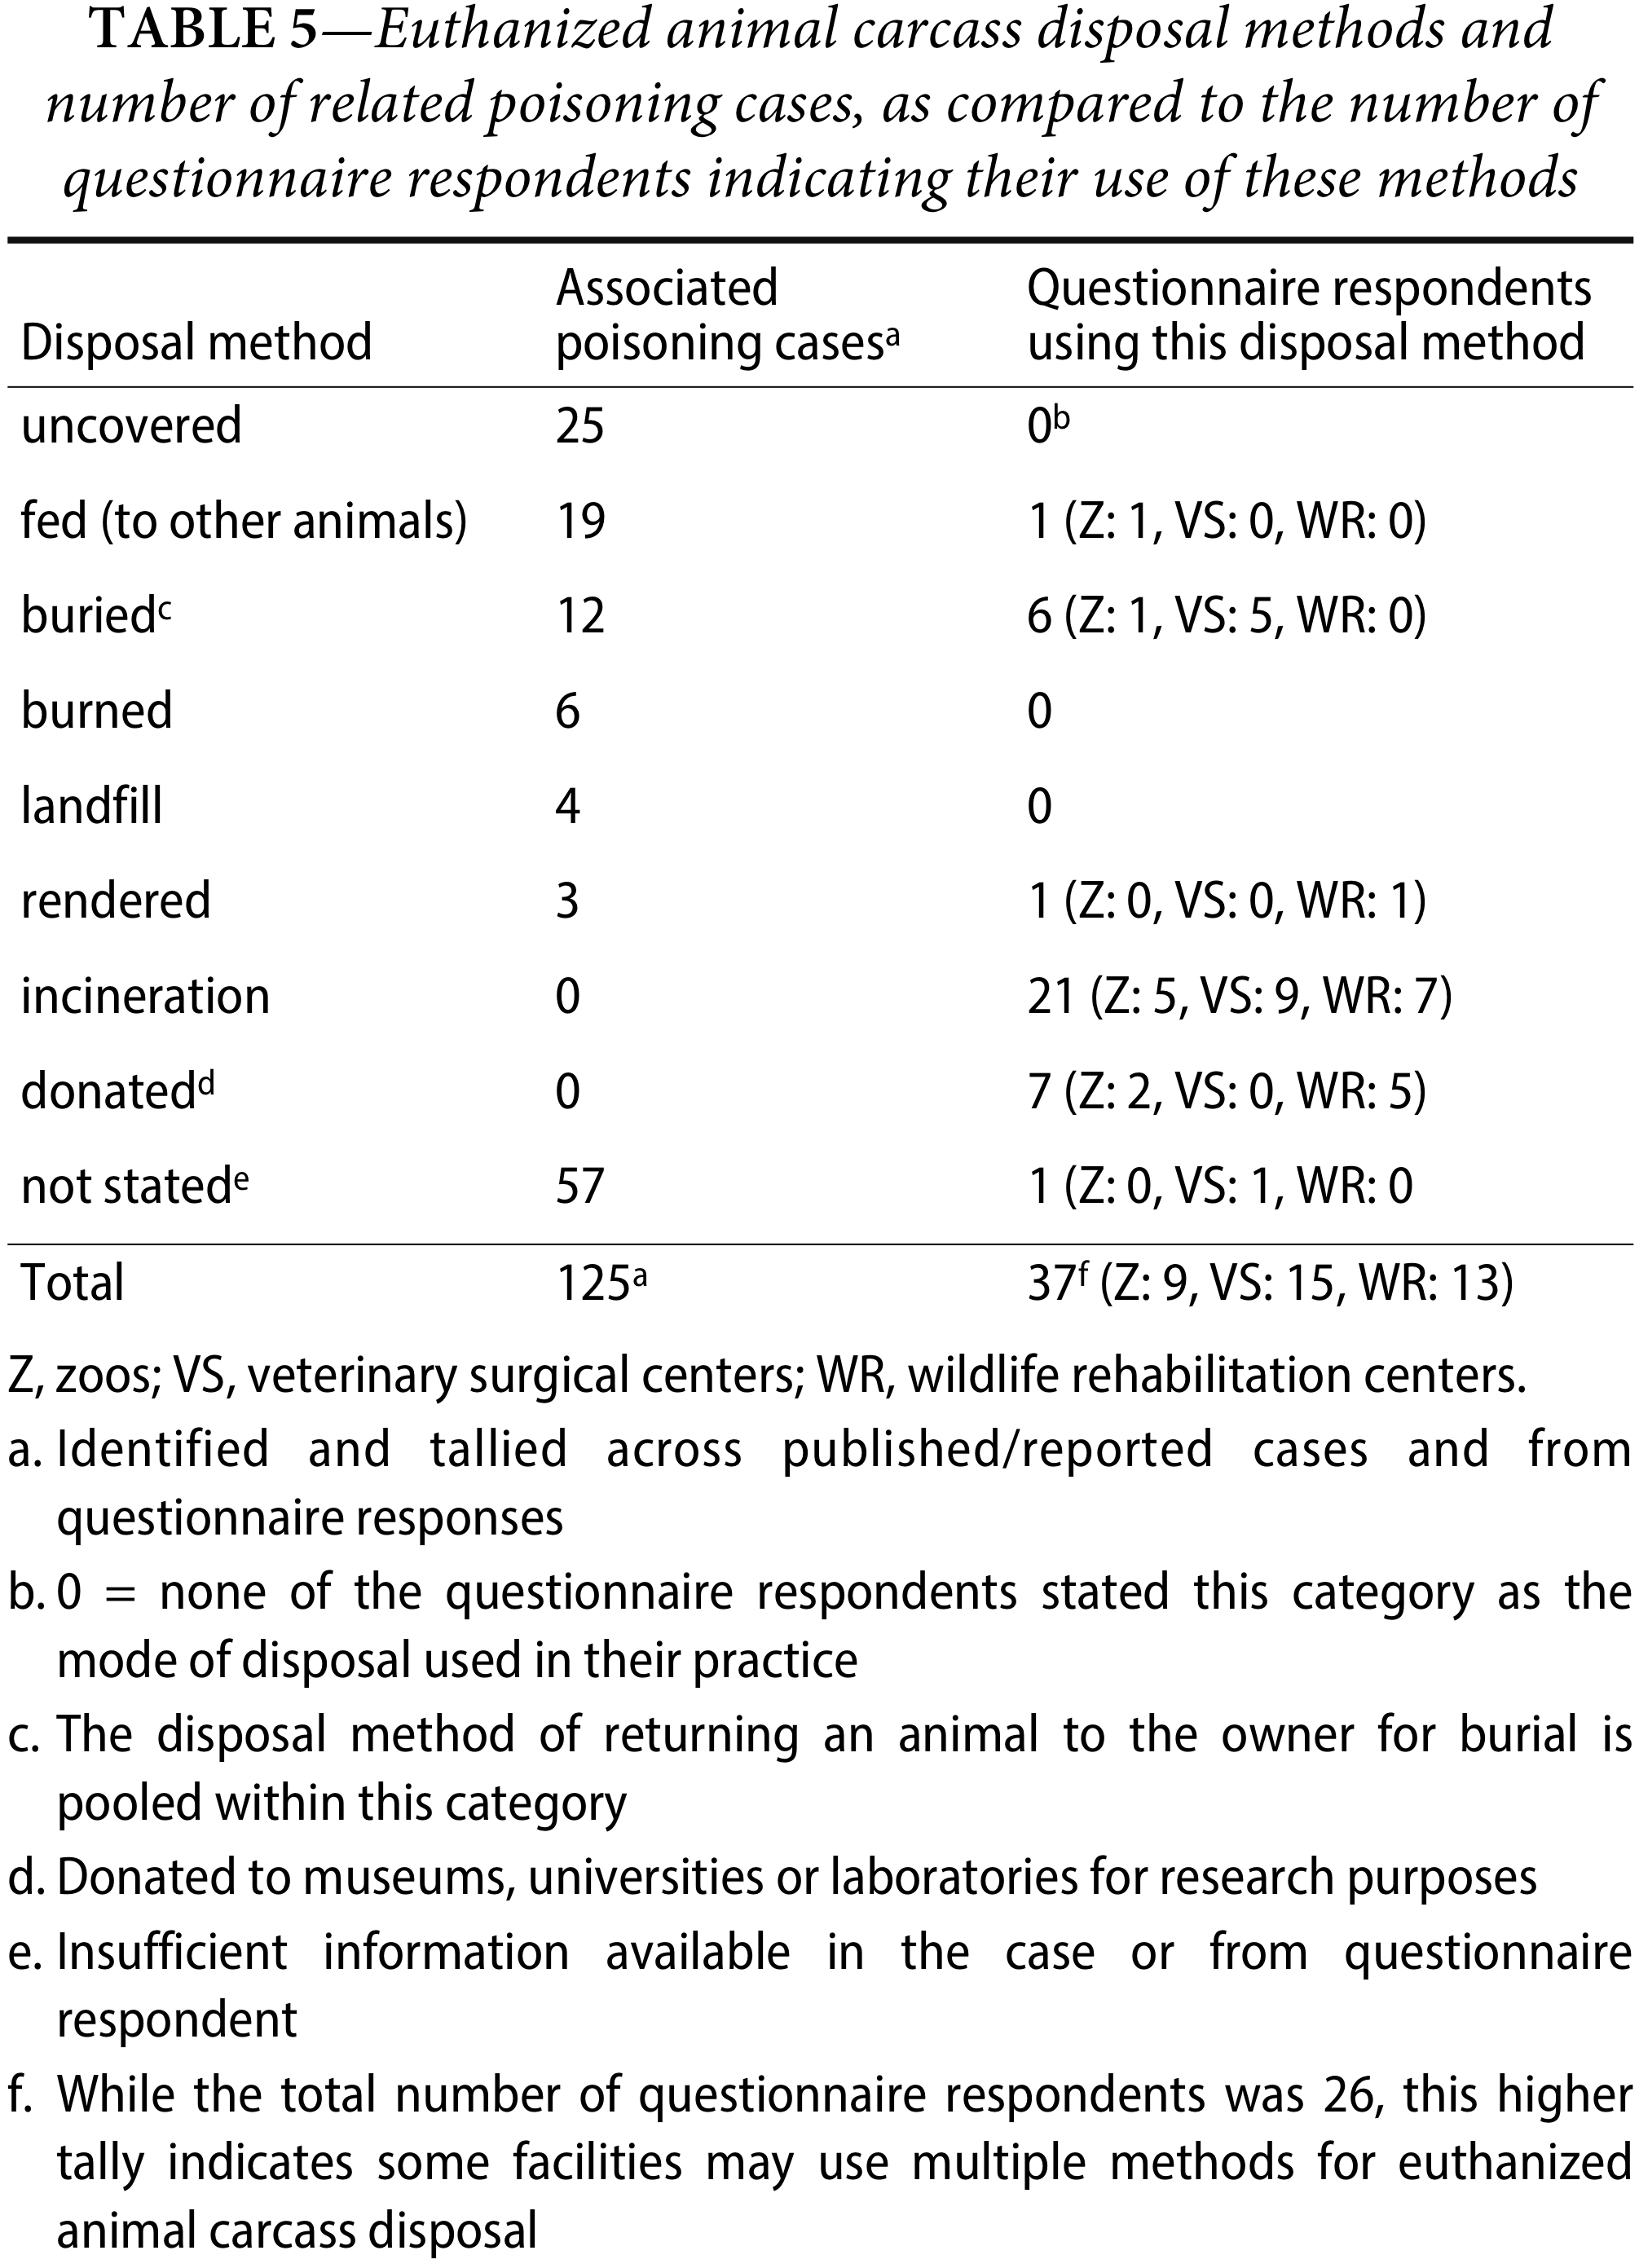 Table 5—Euthanized animal carcass disposal methods and number of related poisoning cases, as compared to the number of questionnaire respondents indicating their use of these methods